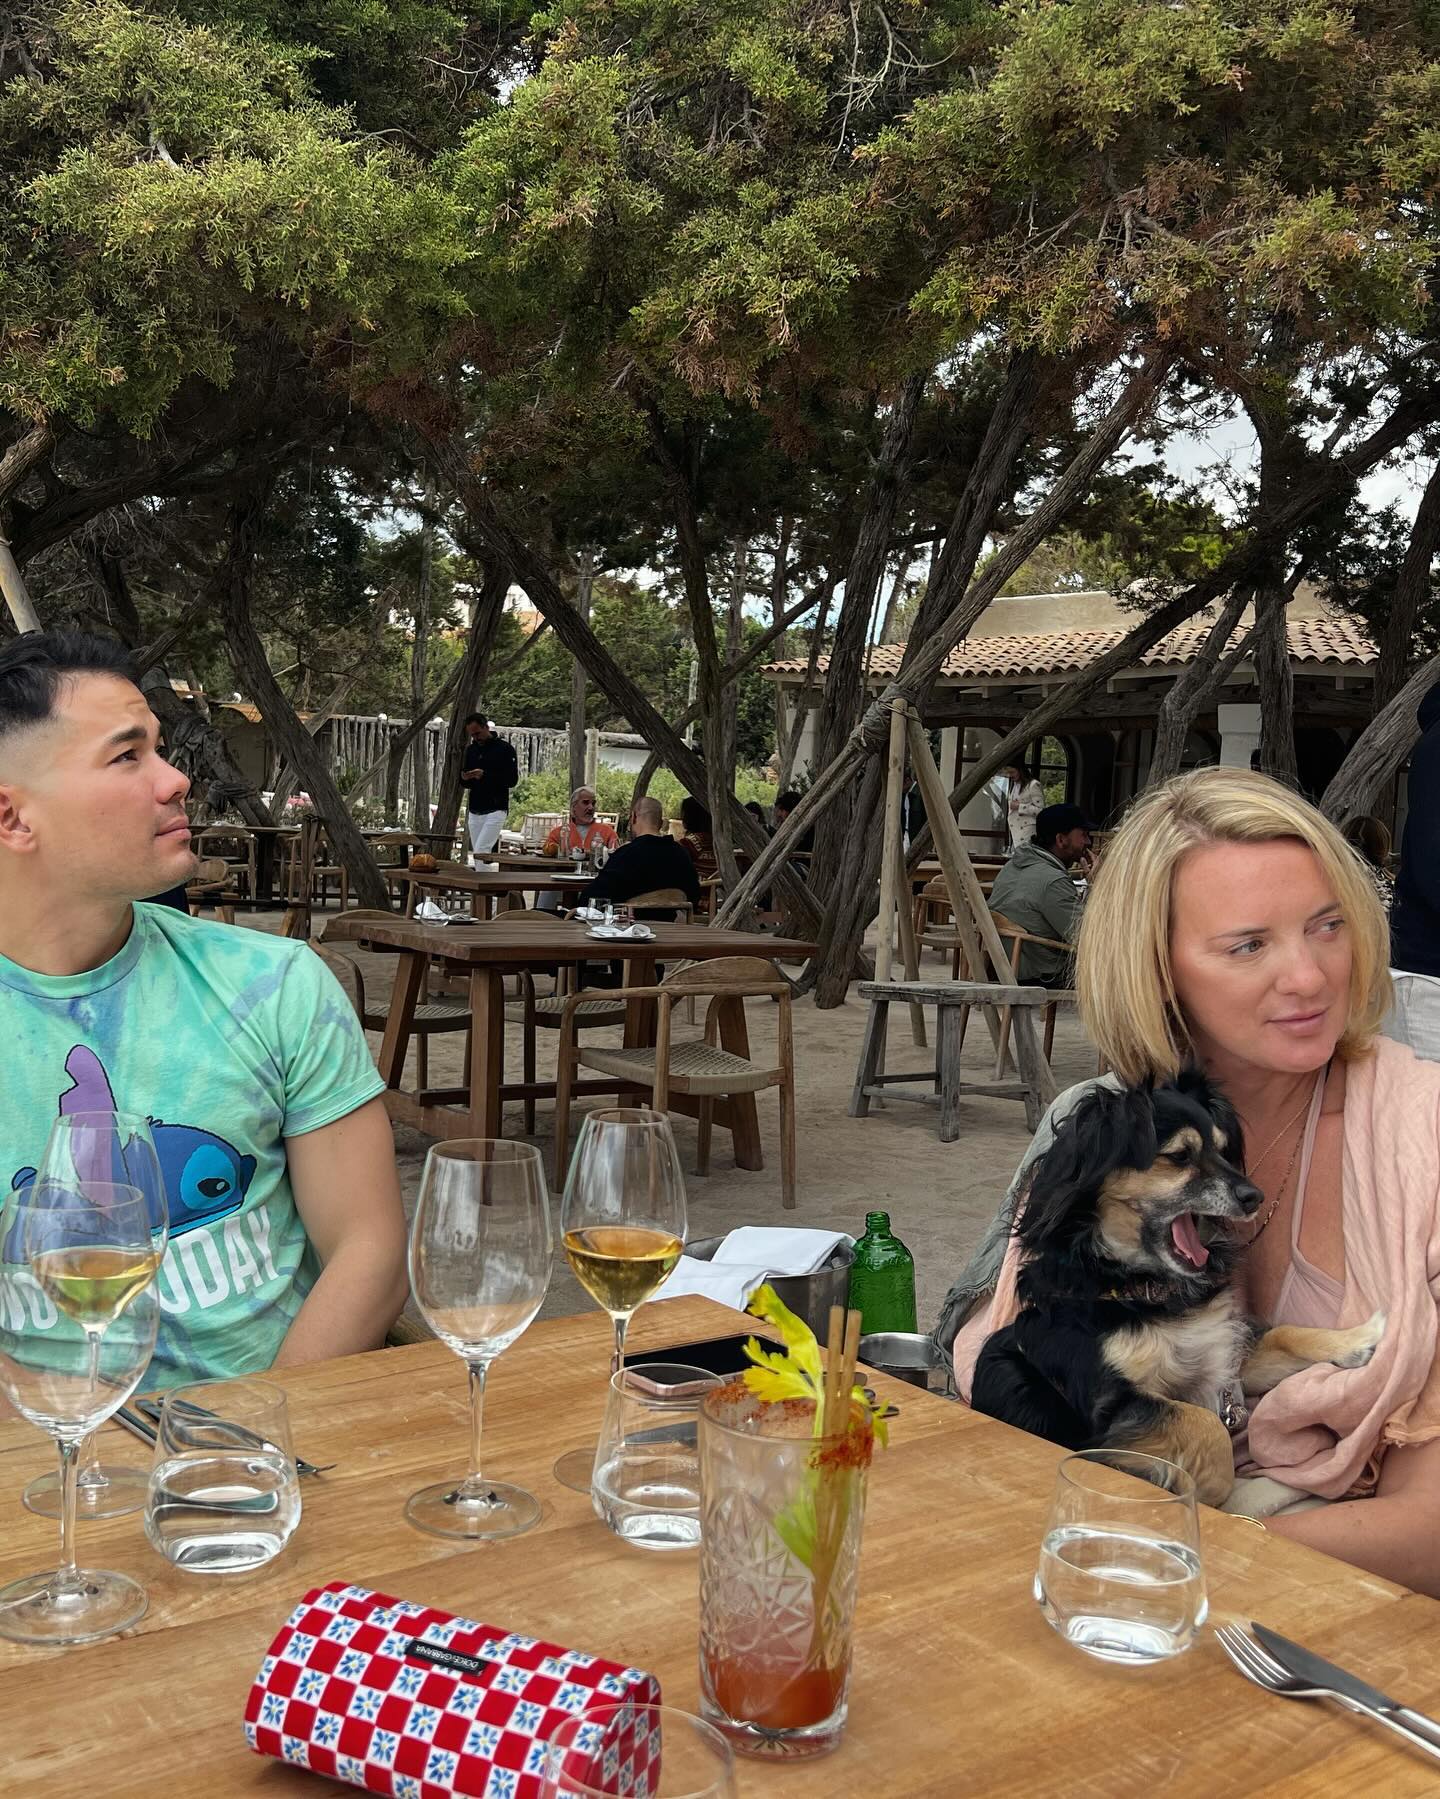 ibiza. april 2024. 🏝️🇪🇸
never enough photos, but so many wonderful memories celebrating @leyatanit’s birthday. cheers to living in the moment, living our lives, easy and breezy. 🎂🖤